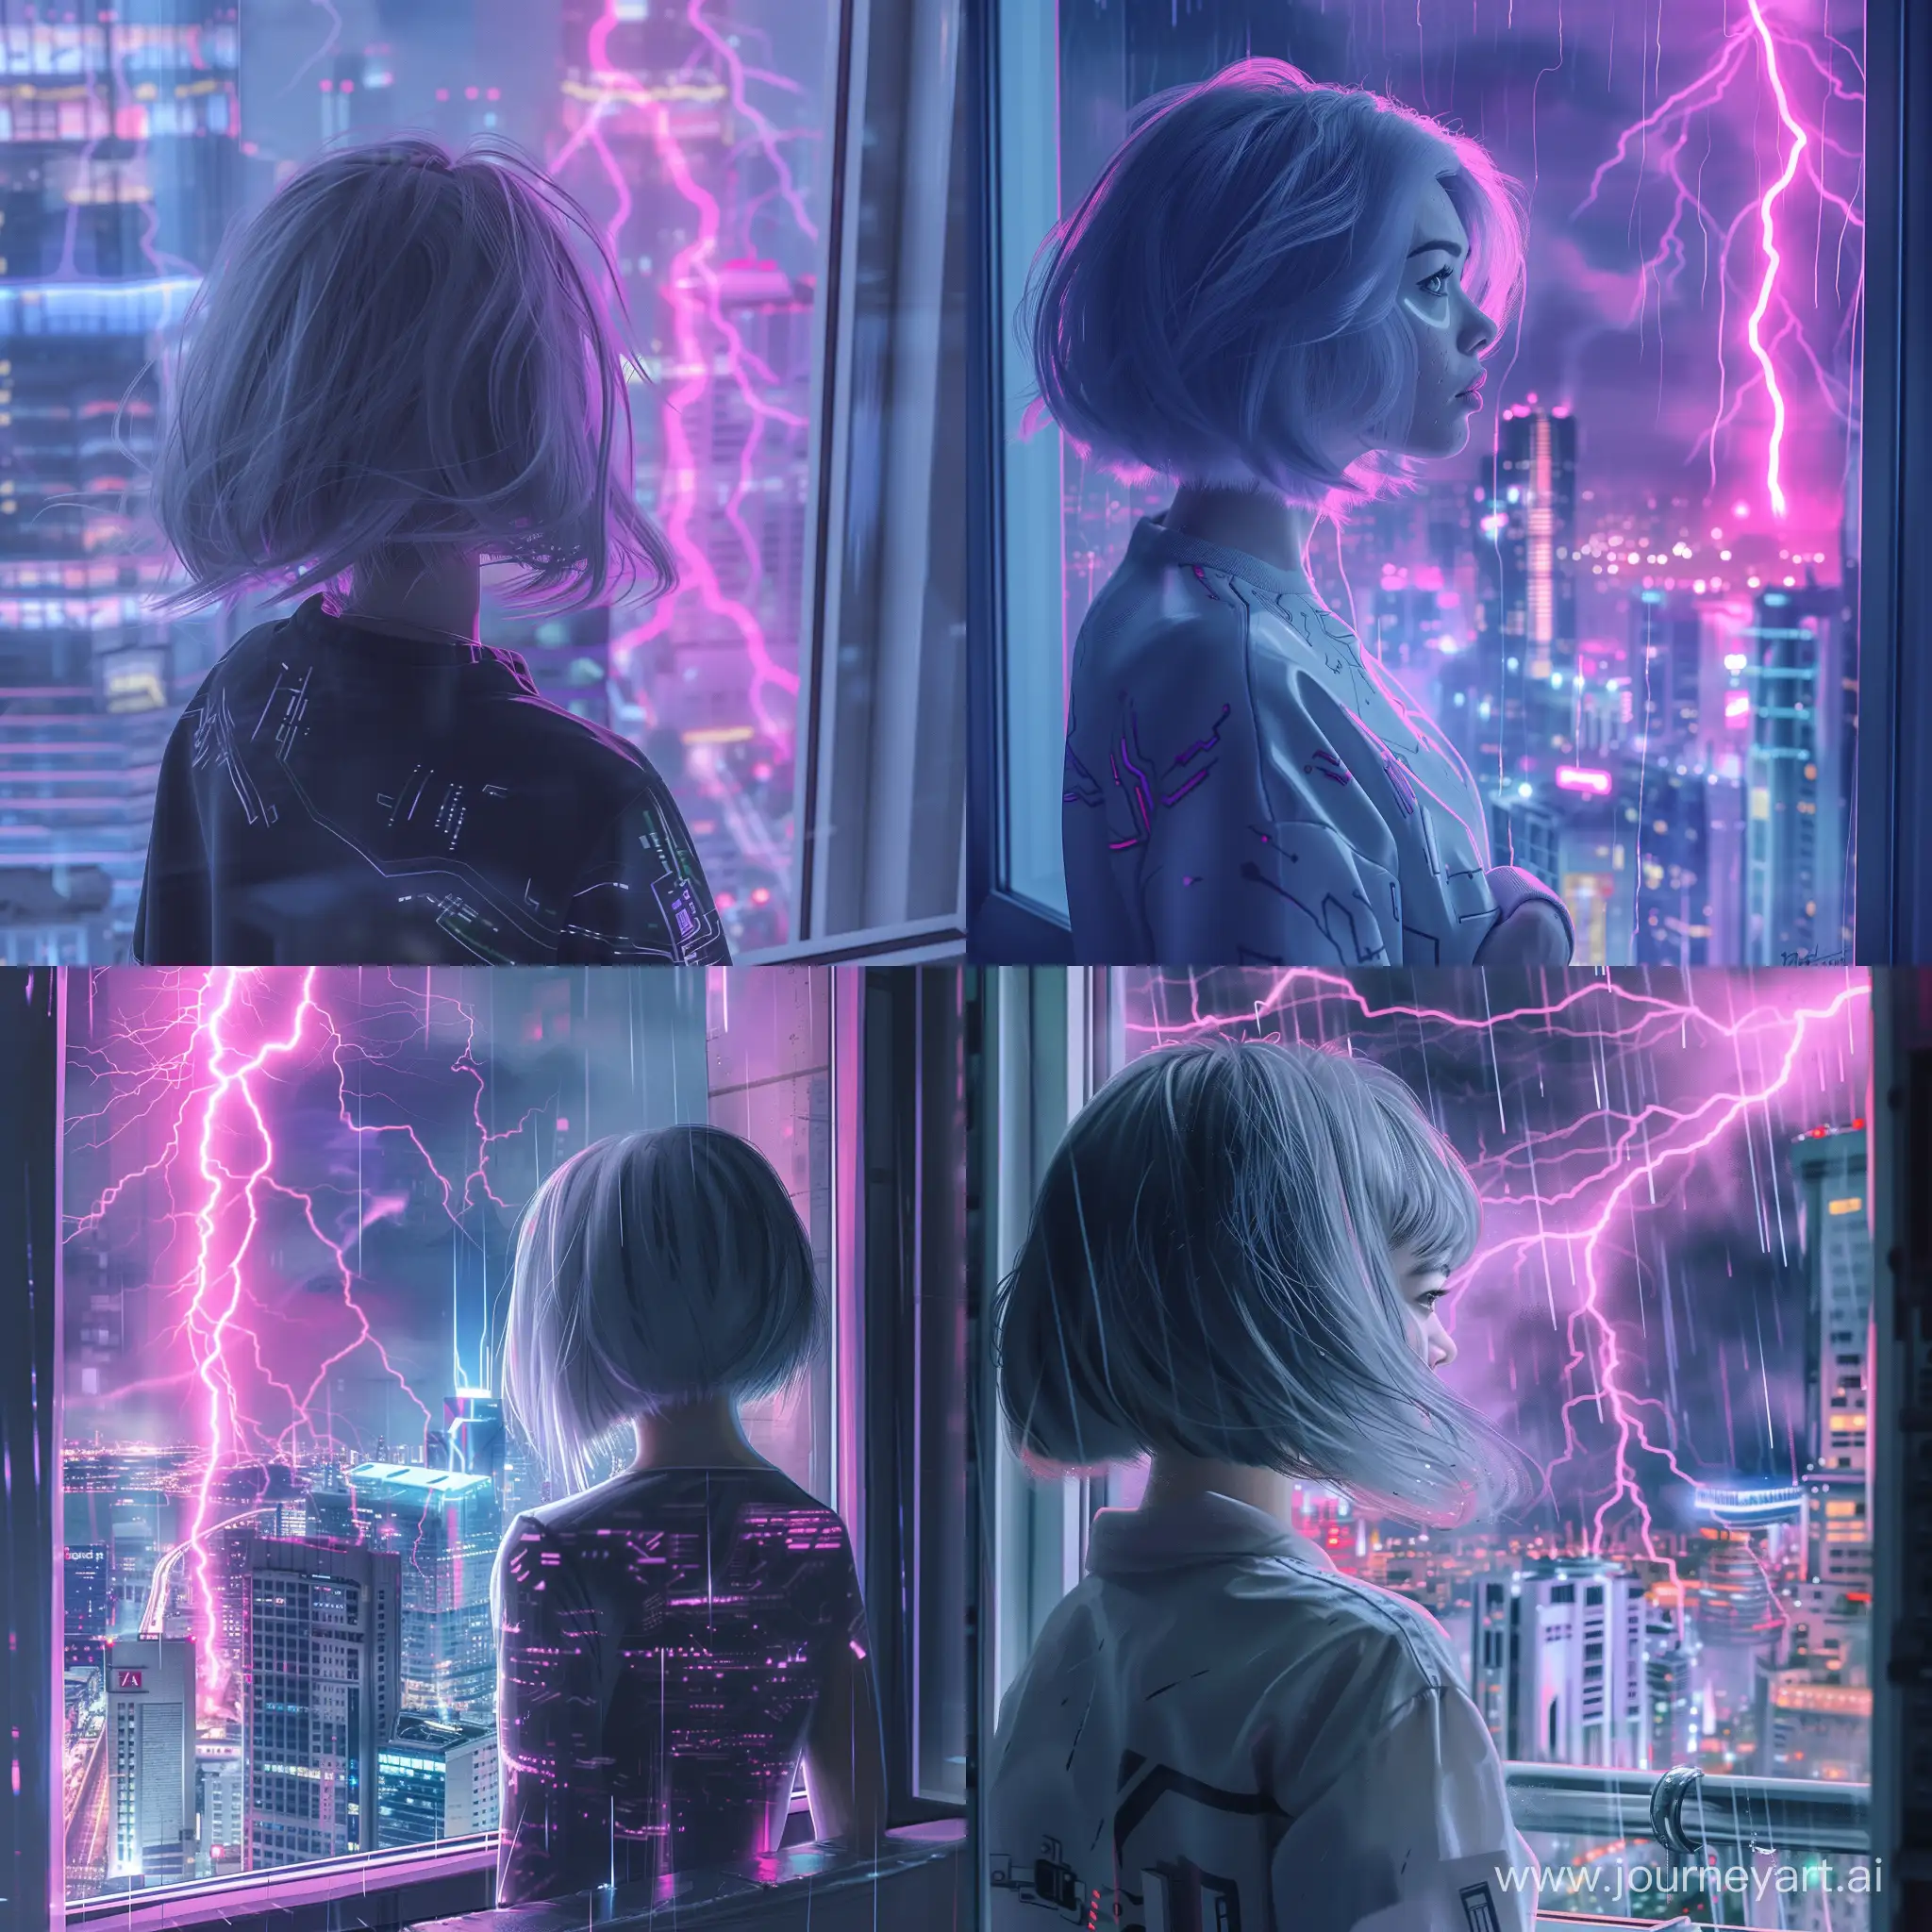 Young-Woman-with-Gray-Hair-Observing-Cyberpunk-City-Lights-from-Window